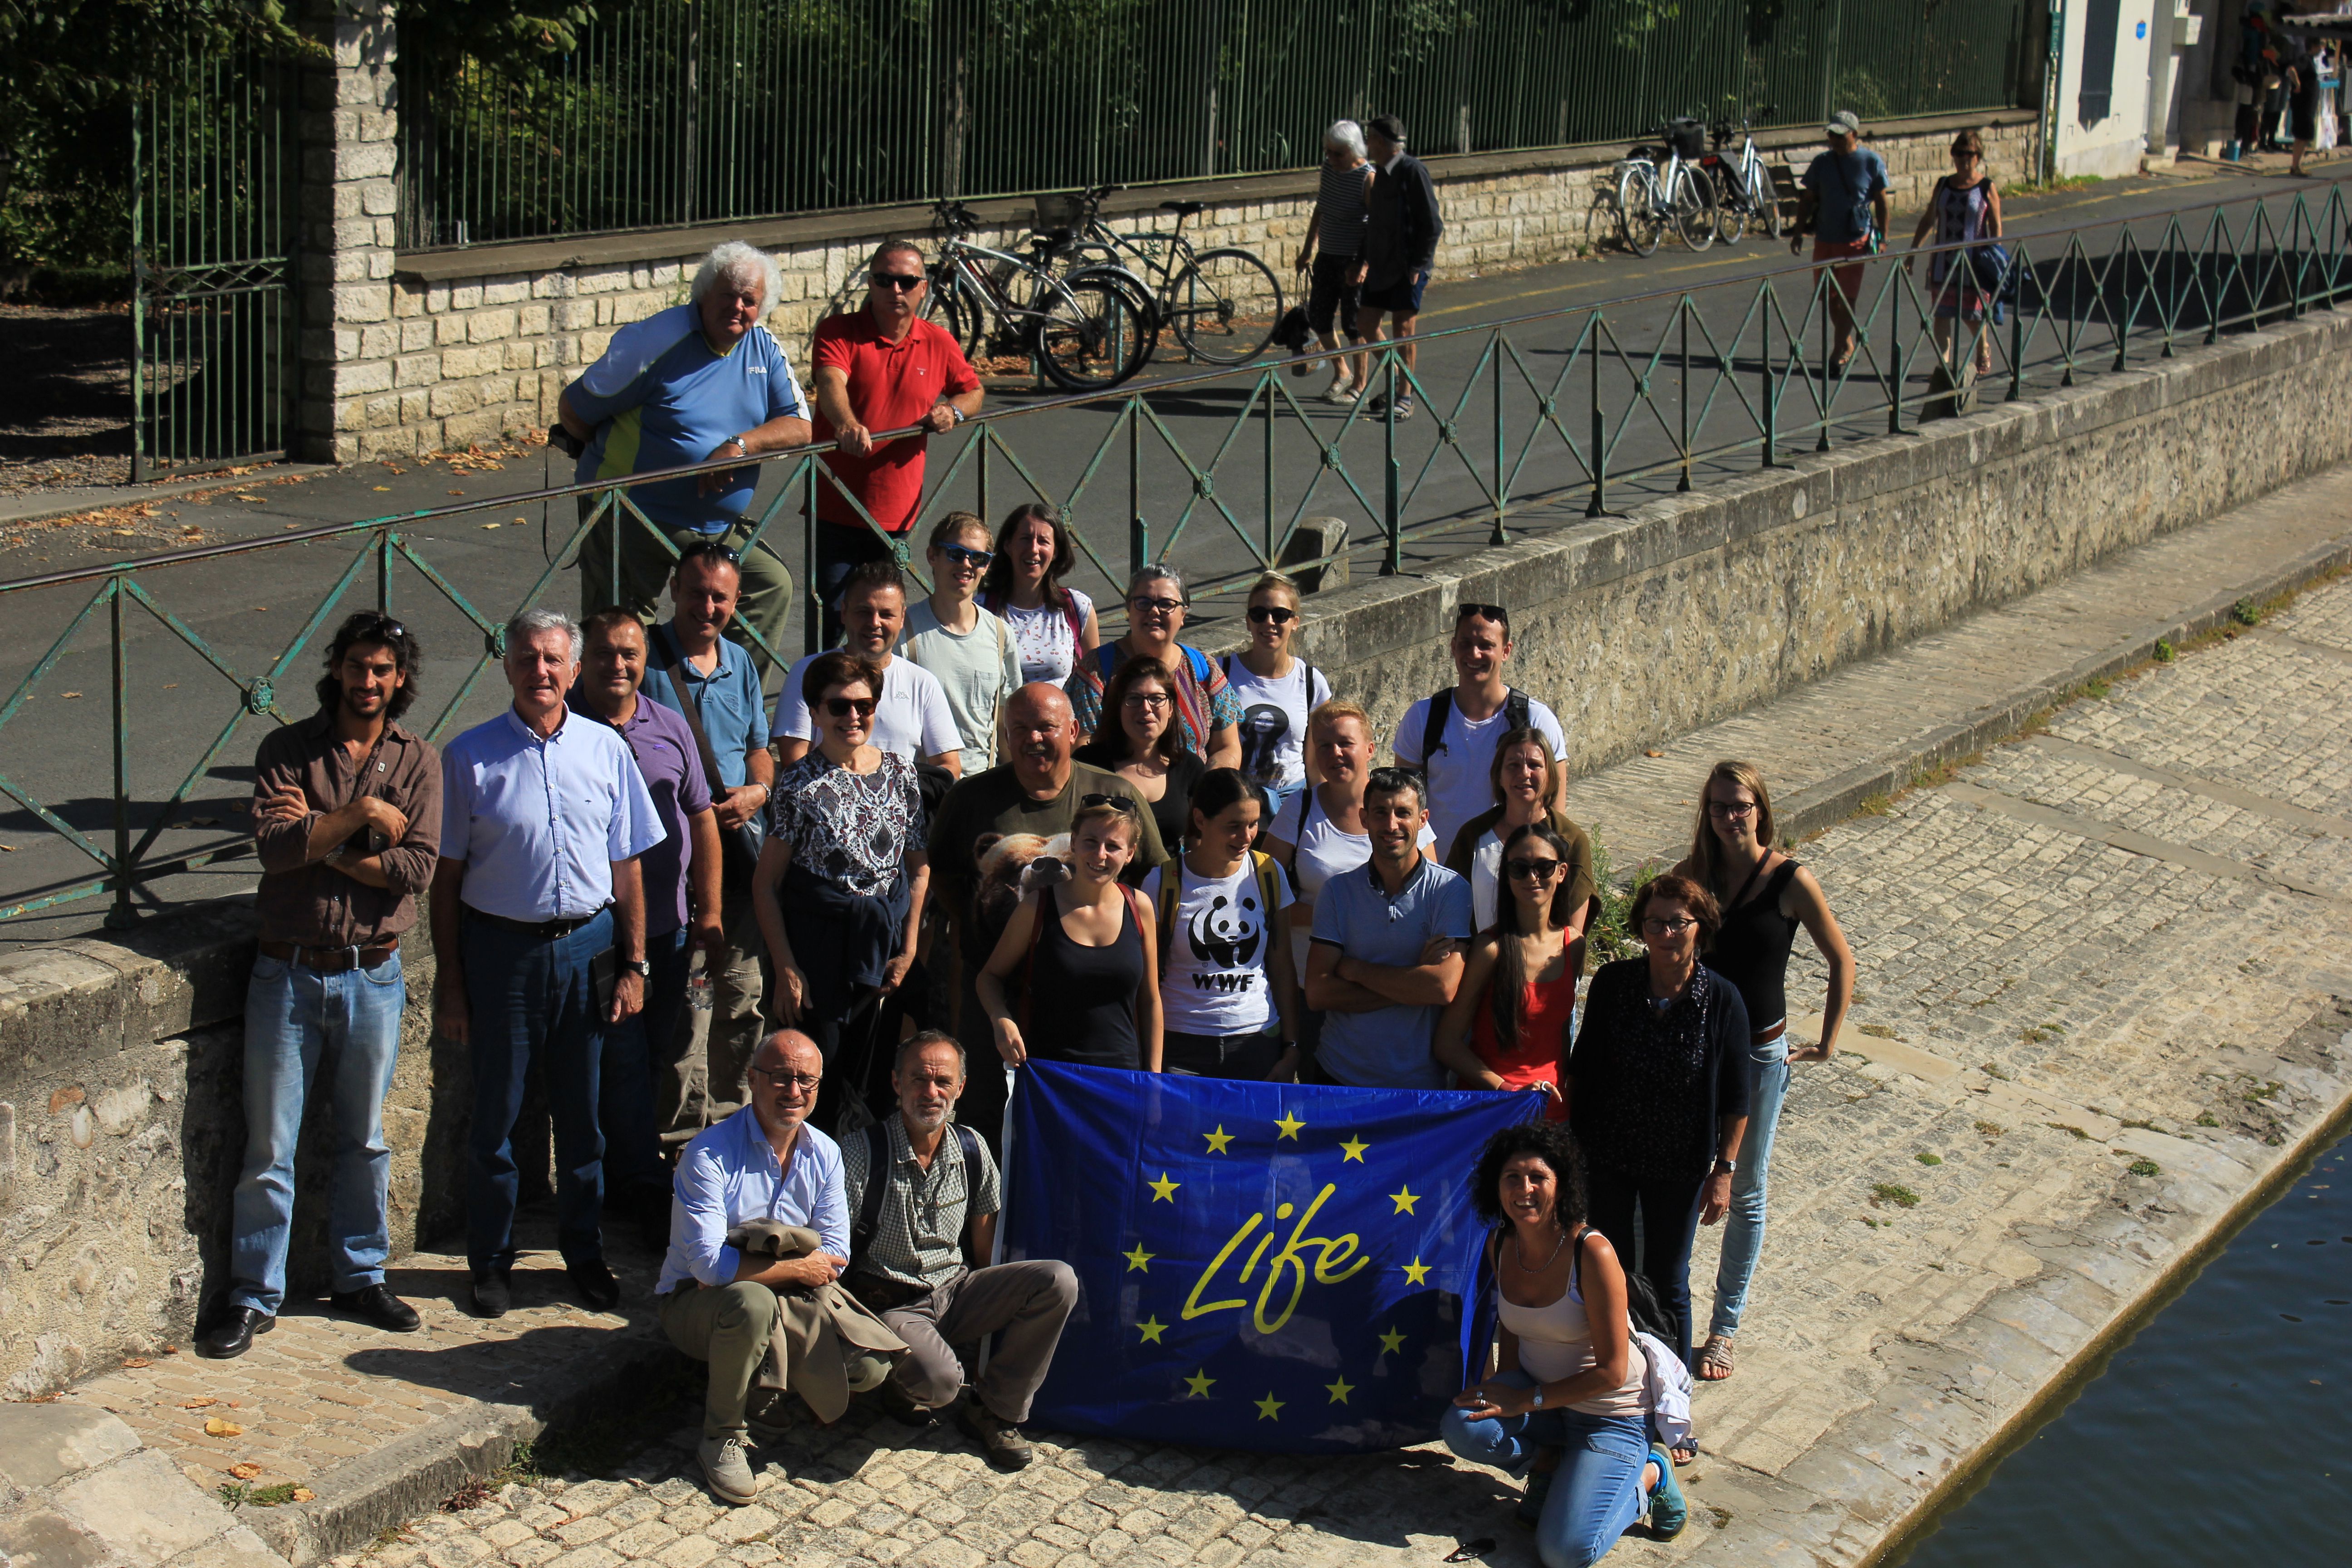 Group photo of the participants